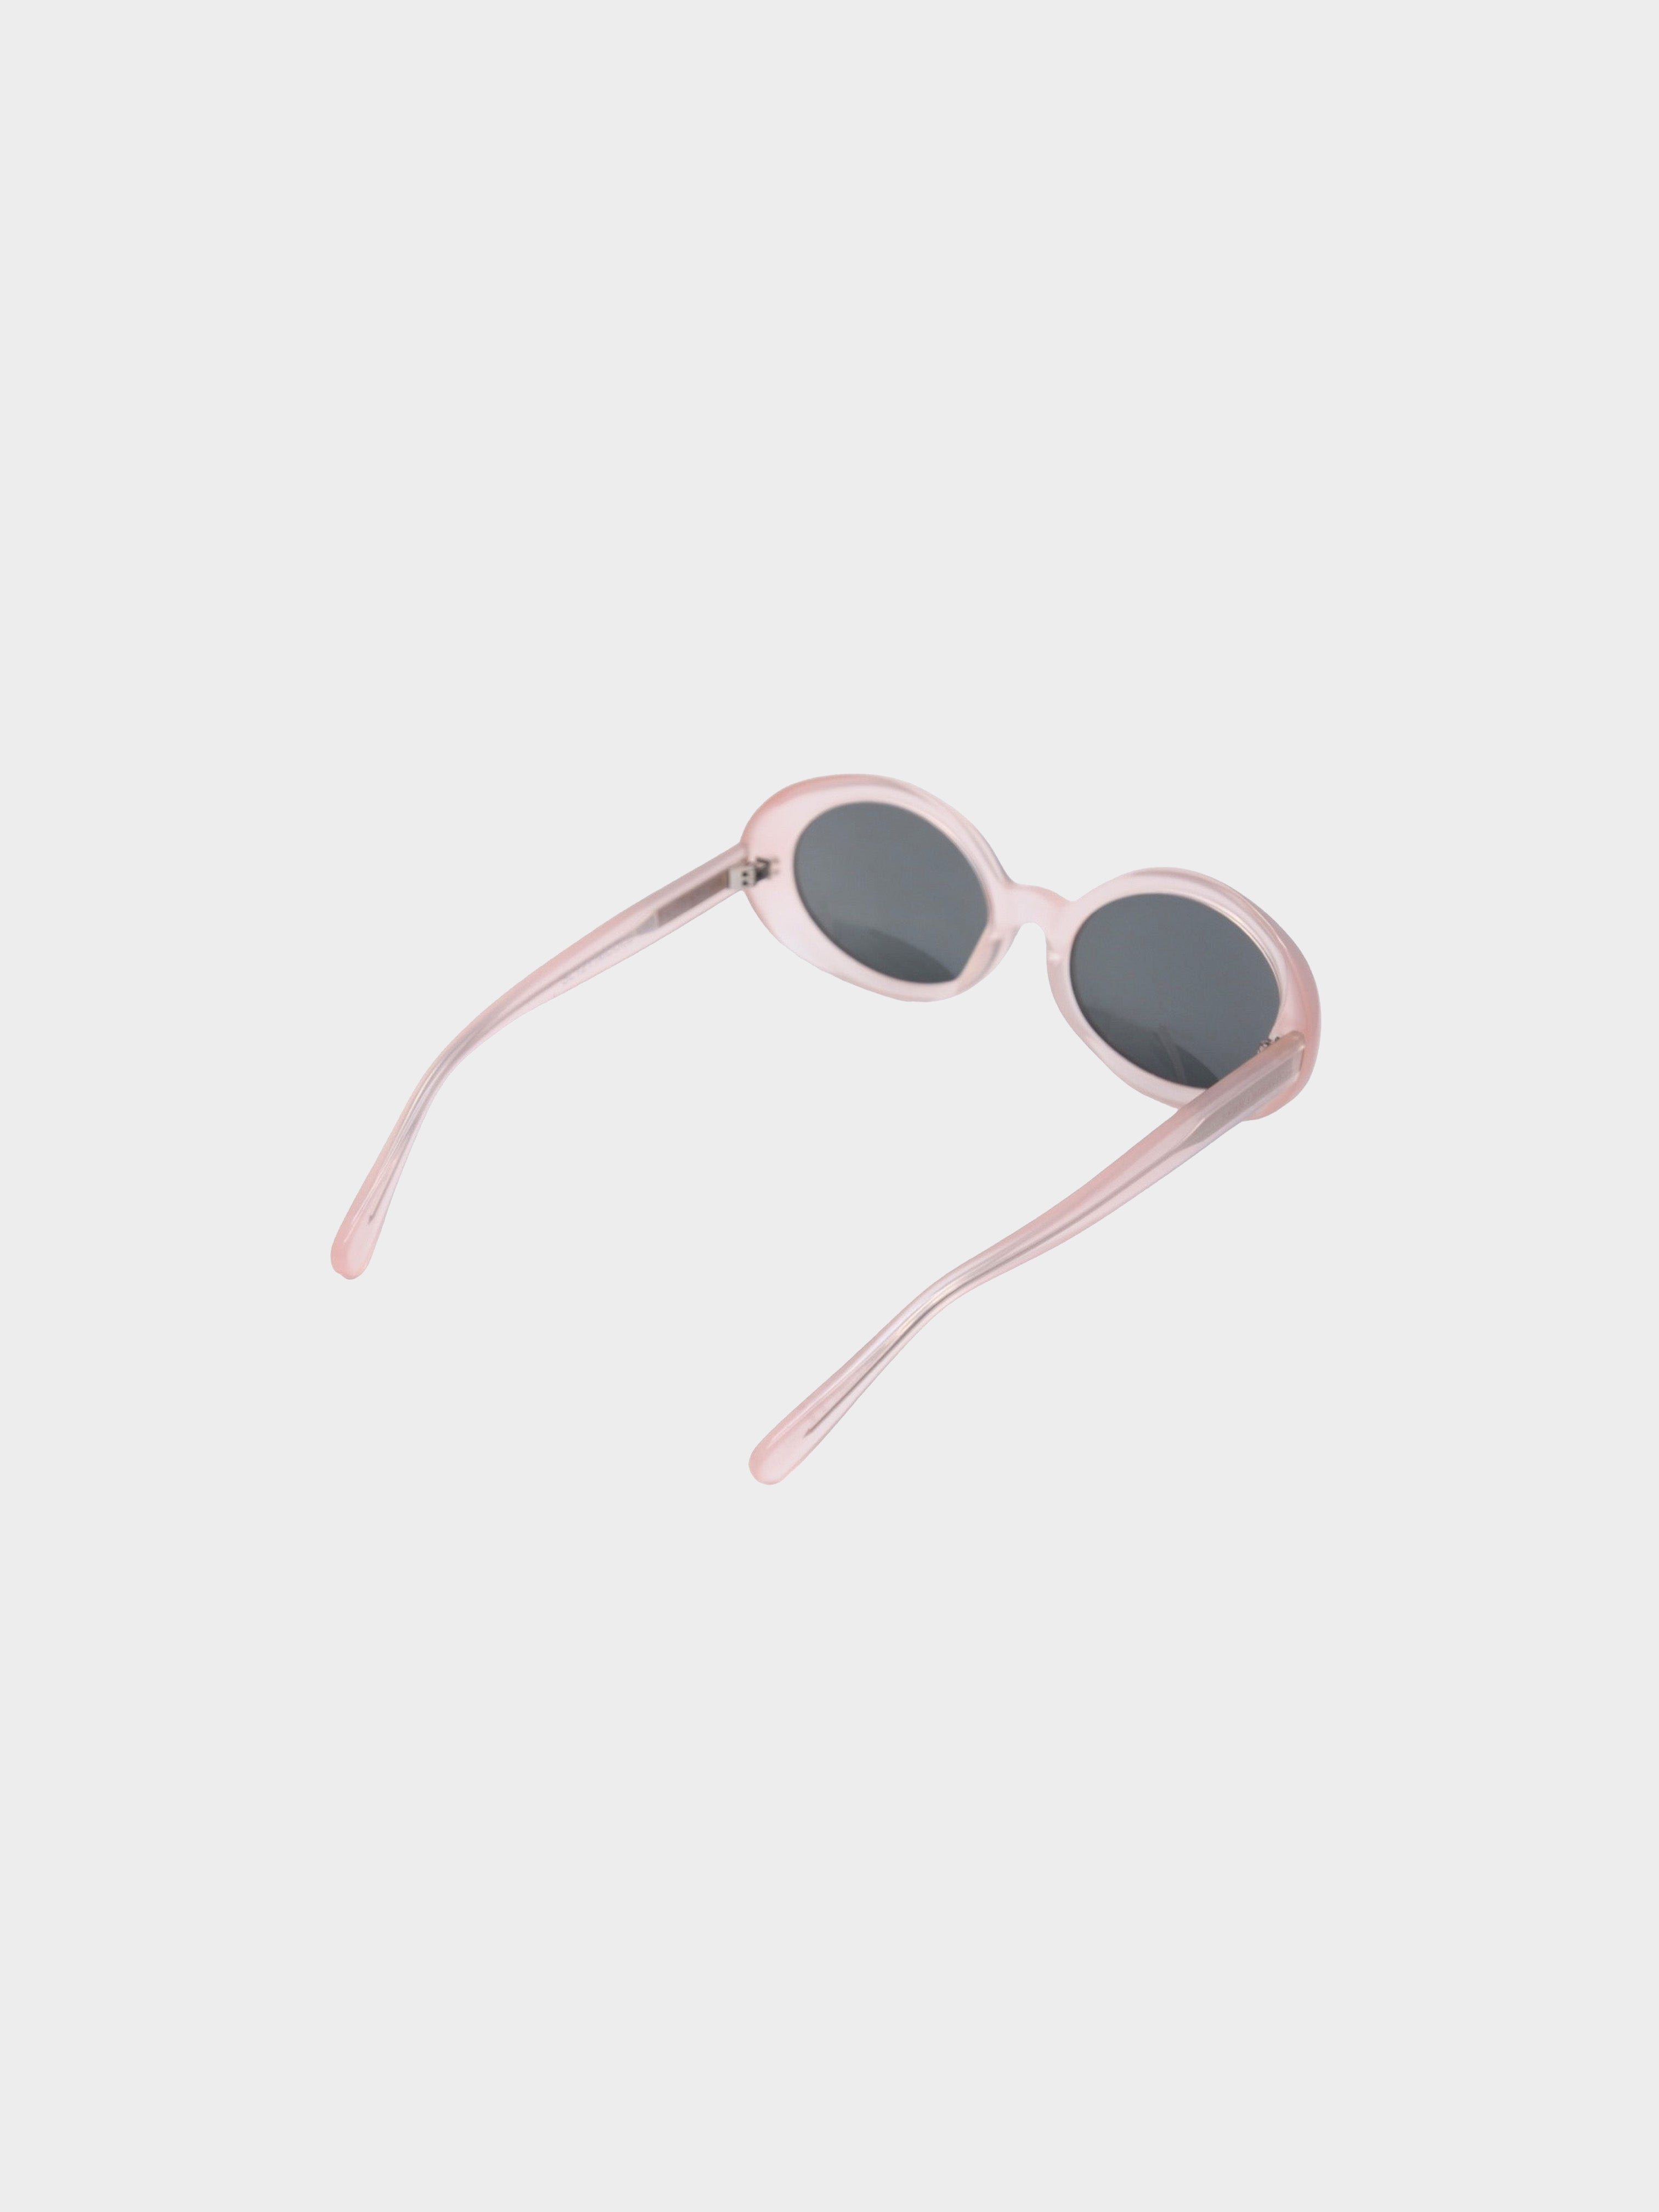 Laurent SS16 Pink Cobain Sunglasses · INTO